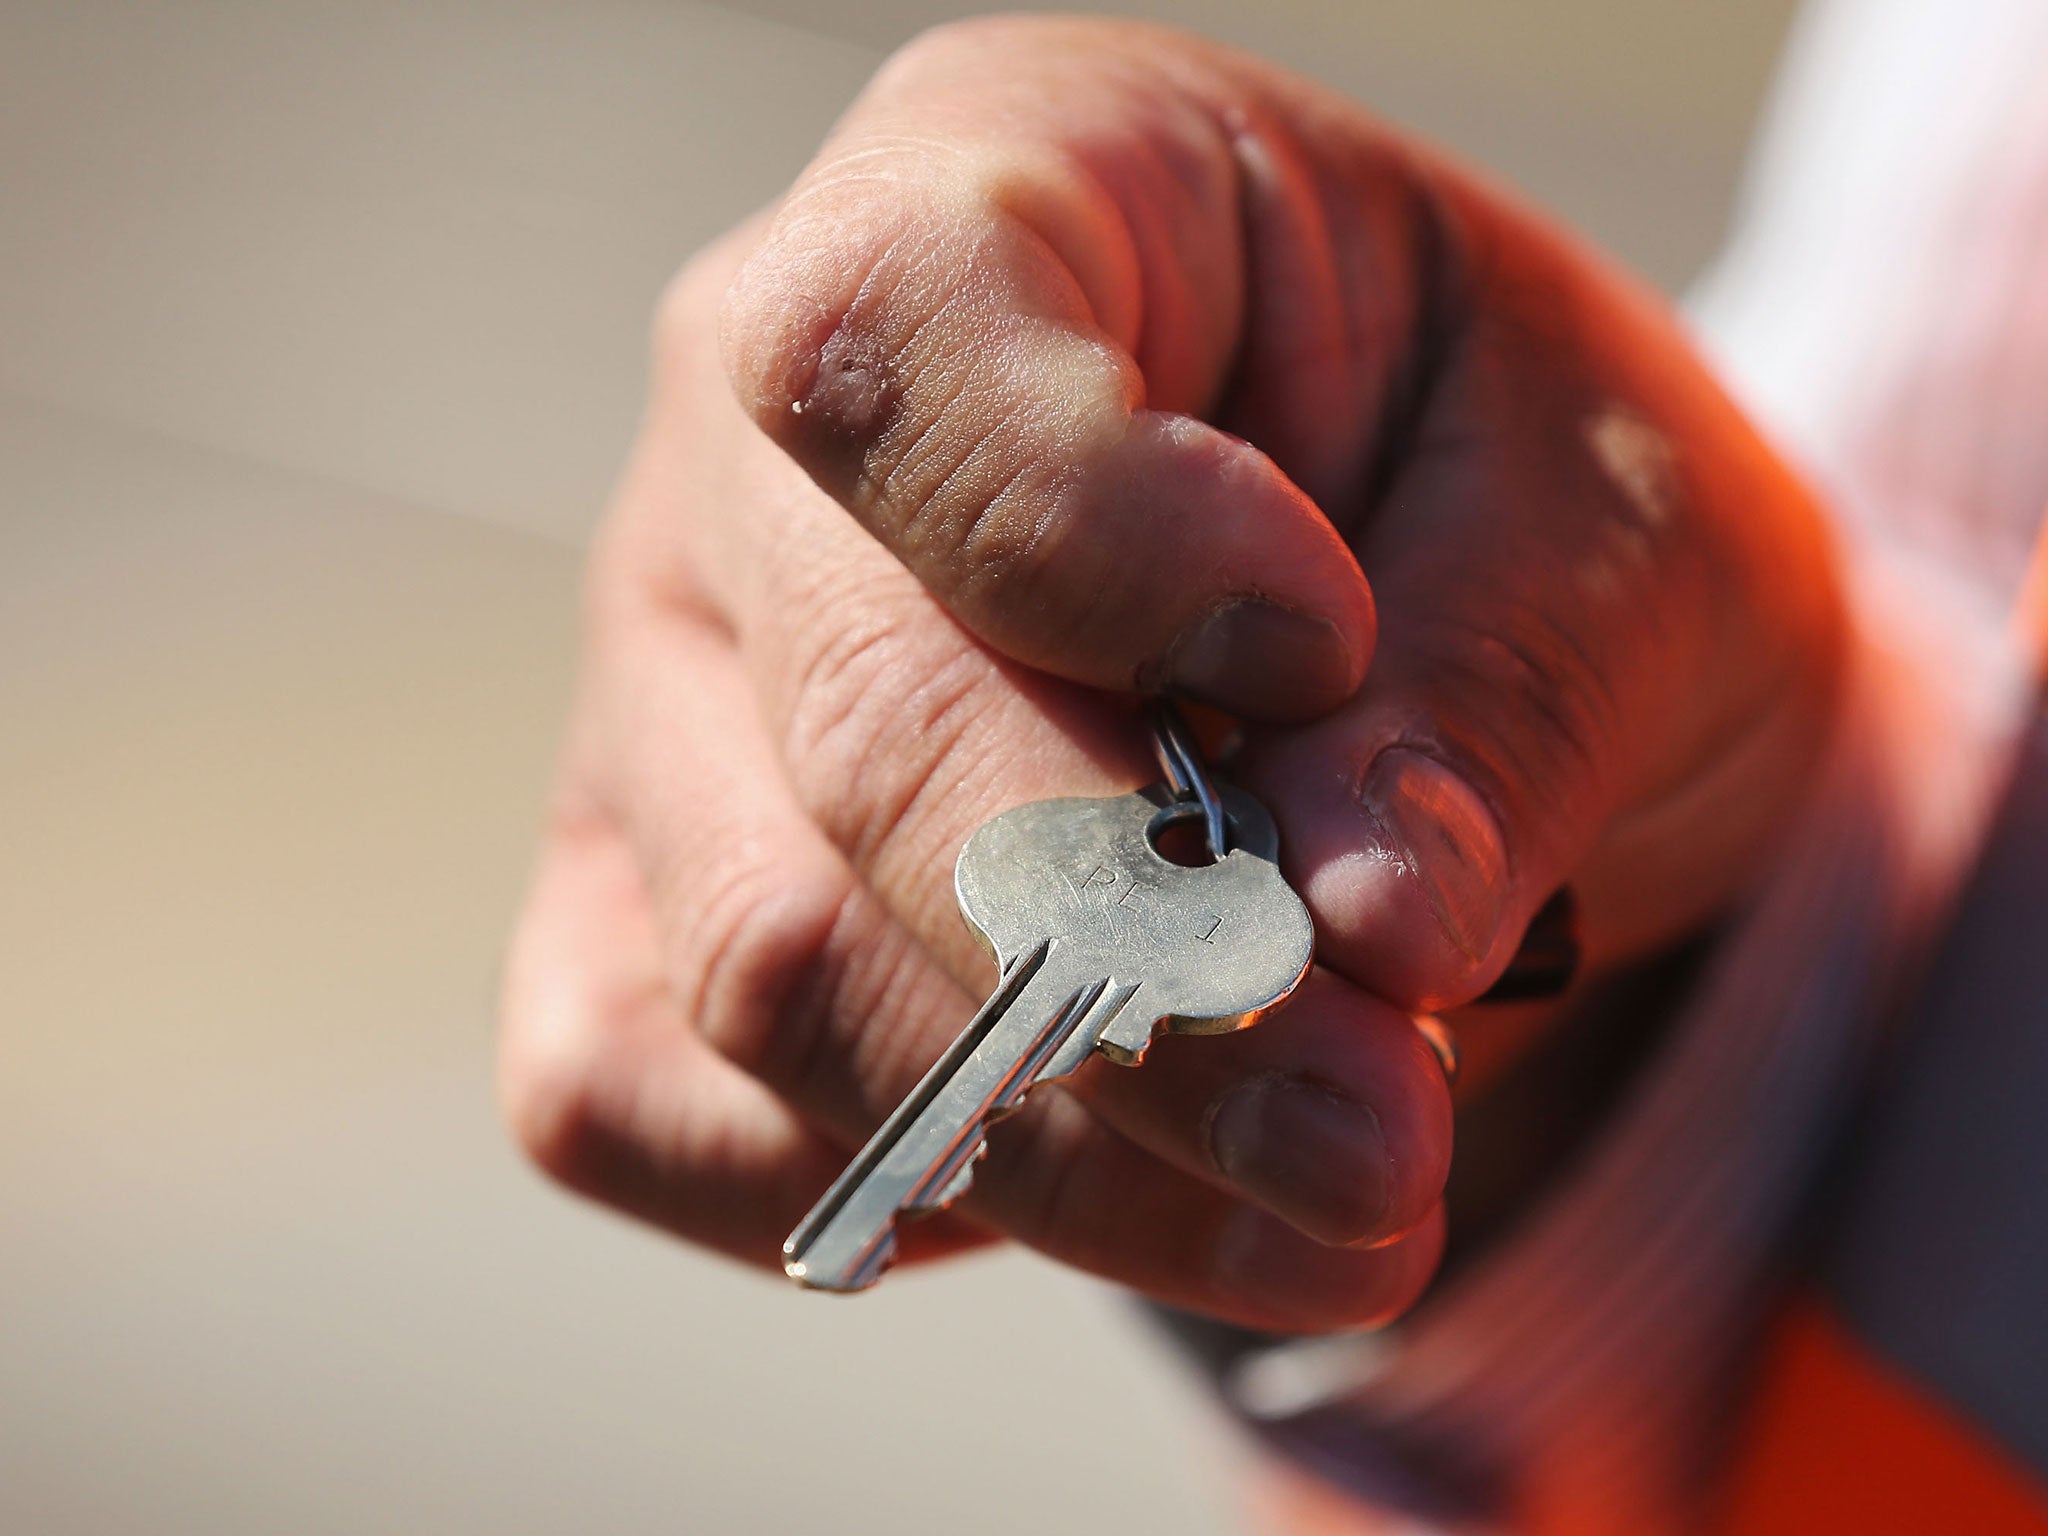 There is a simple way to keep hold of your keys, according to a neuroscientist